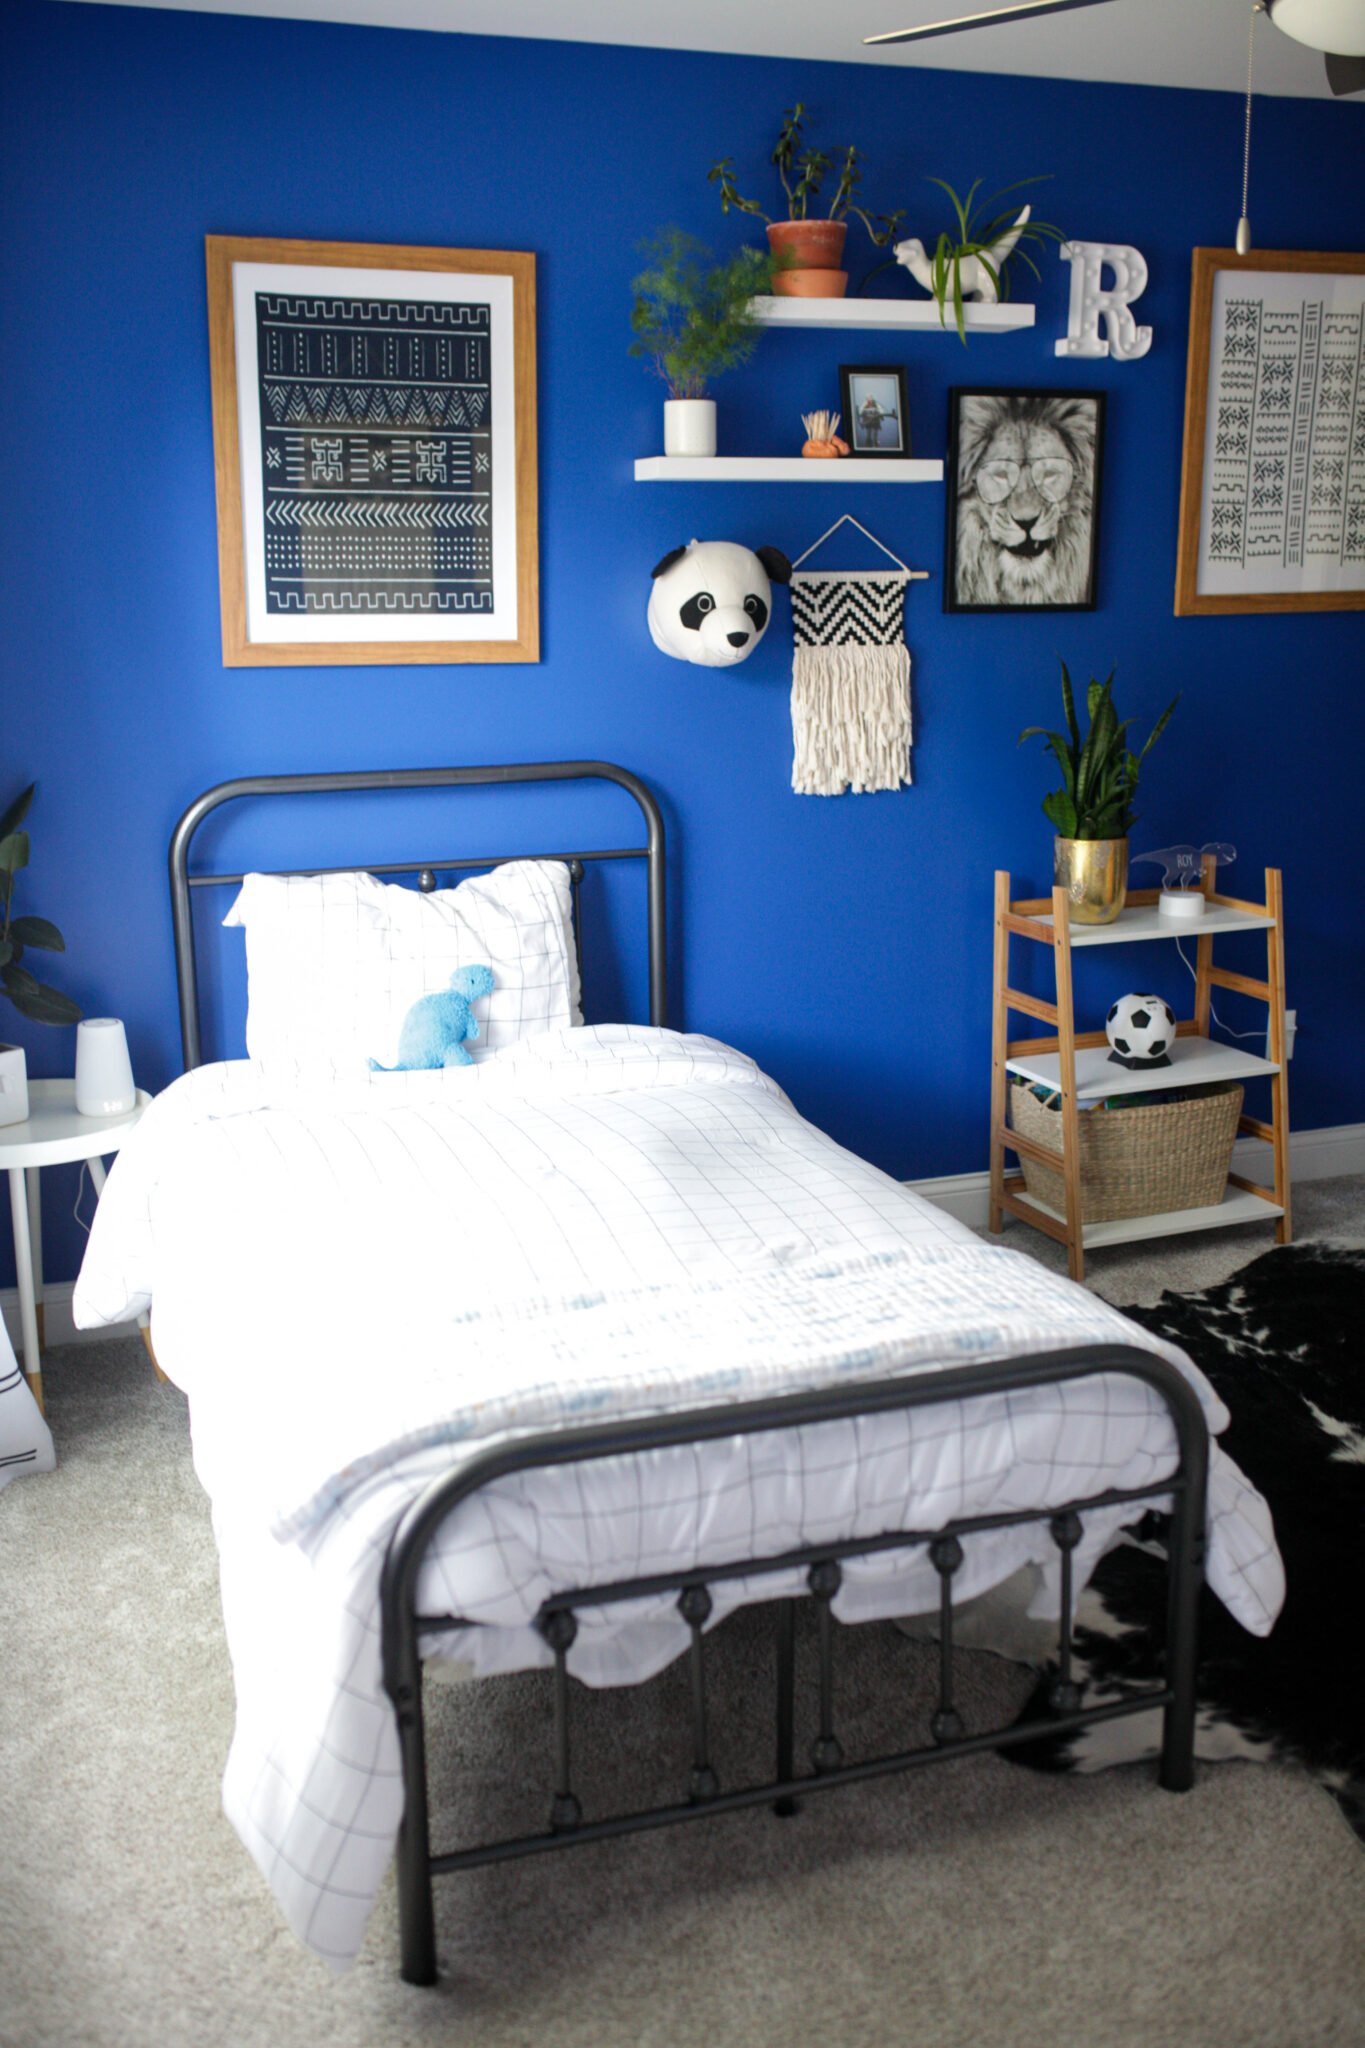 Bed and gallery wall in bright blue boys bedroom